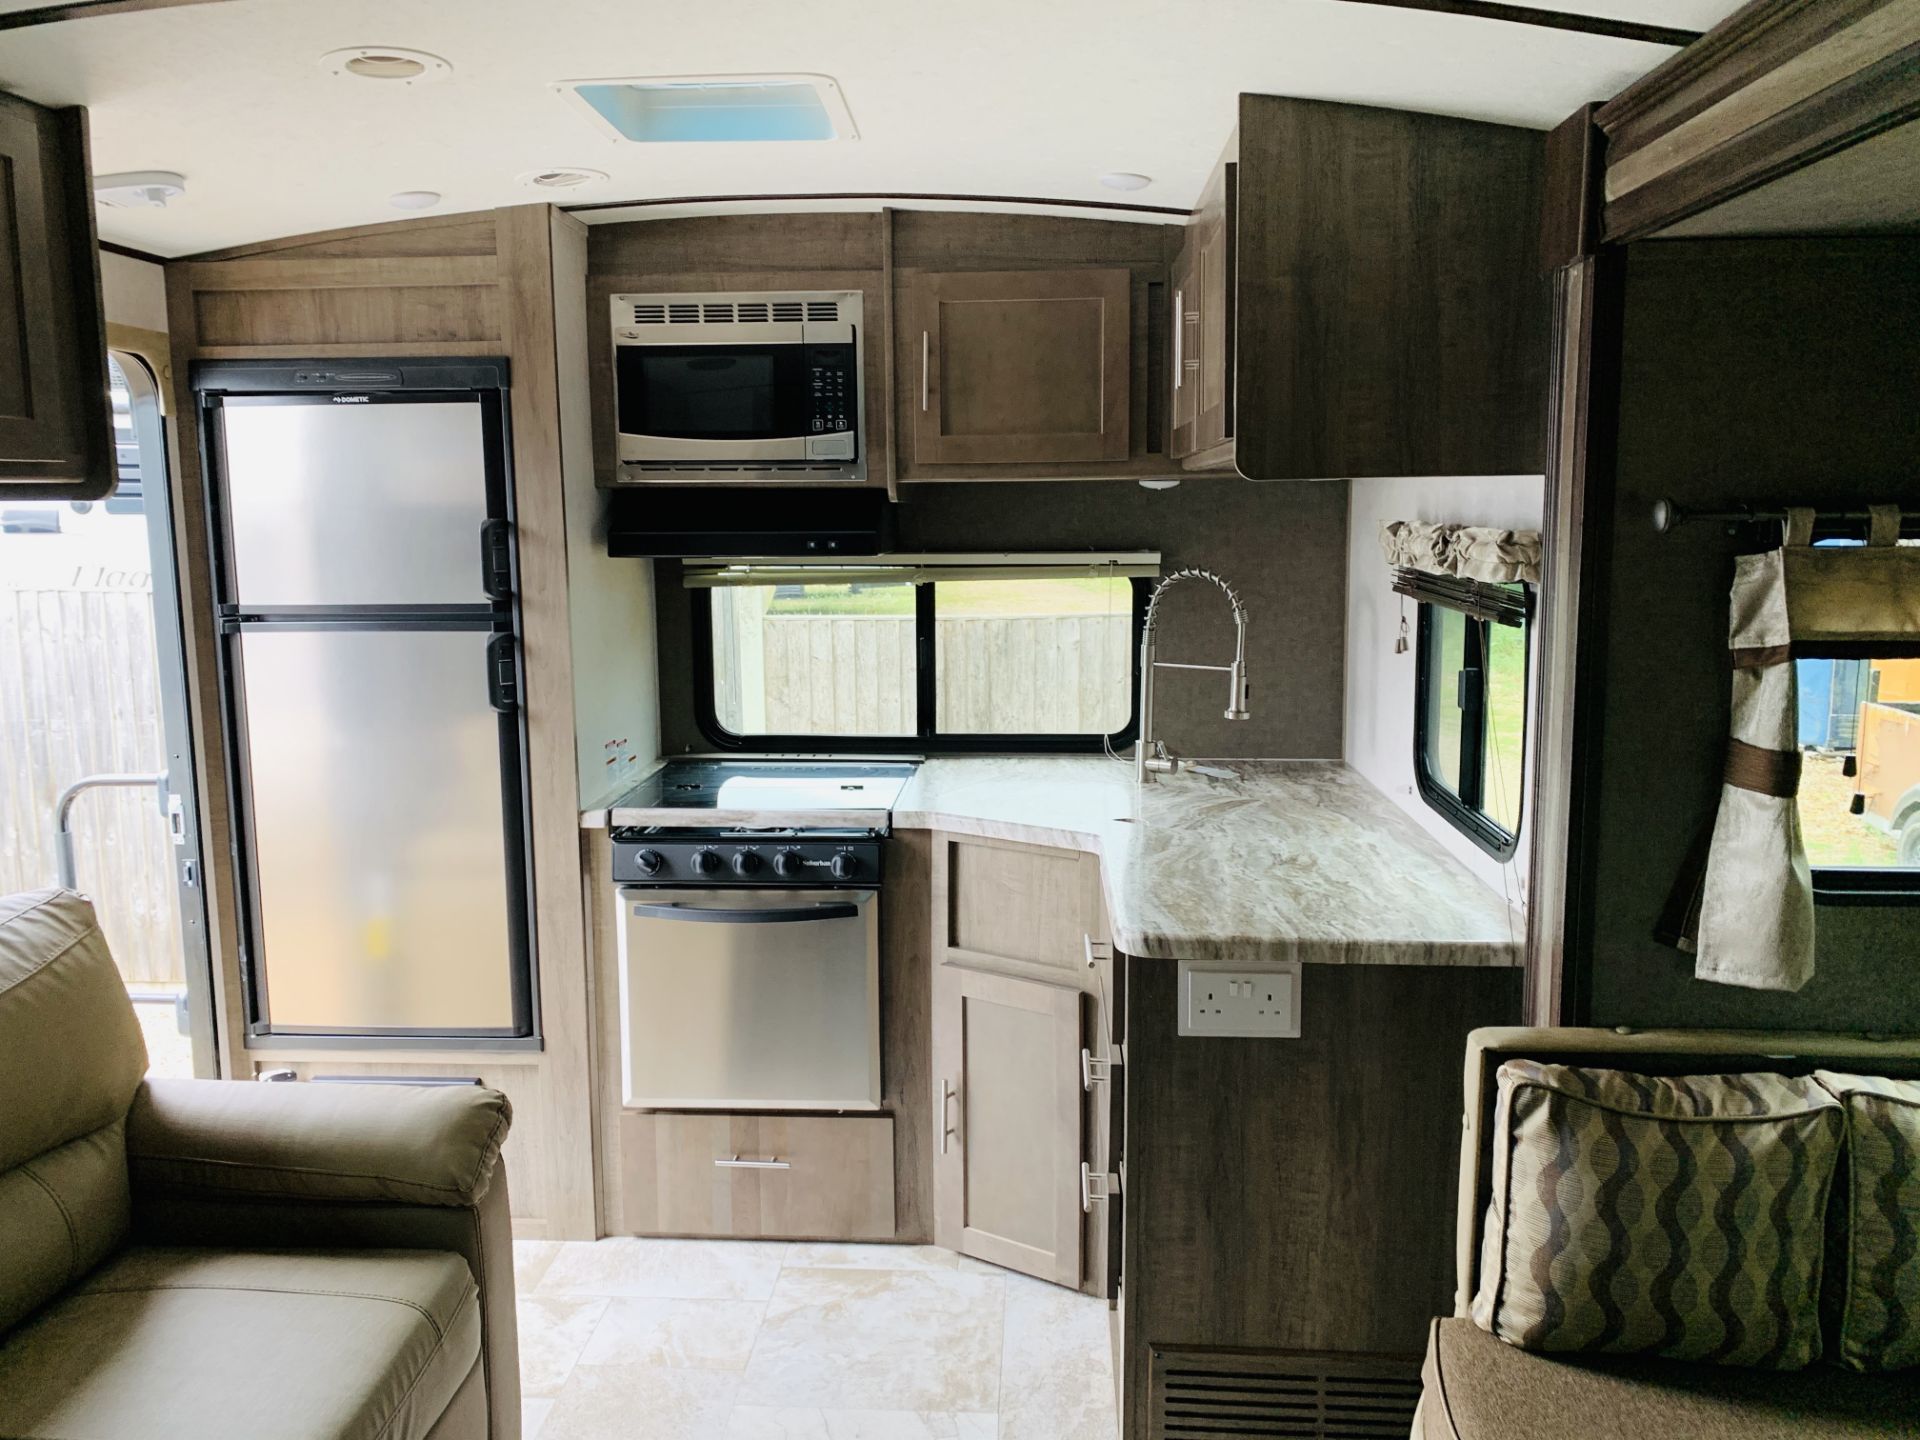 ** ON SALE ** Forest River Surveyor 251 RKS 2020 Spec RV - 6 Berth -Air Conditioning- Rear Kitchen- - Image 28 of 63